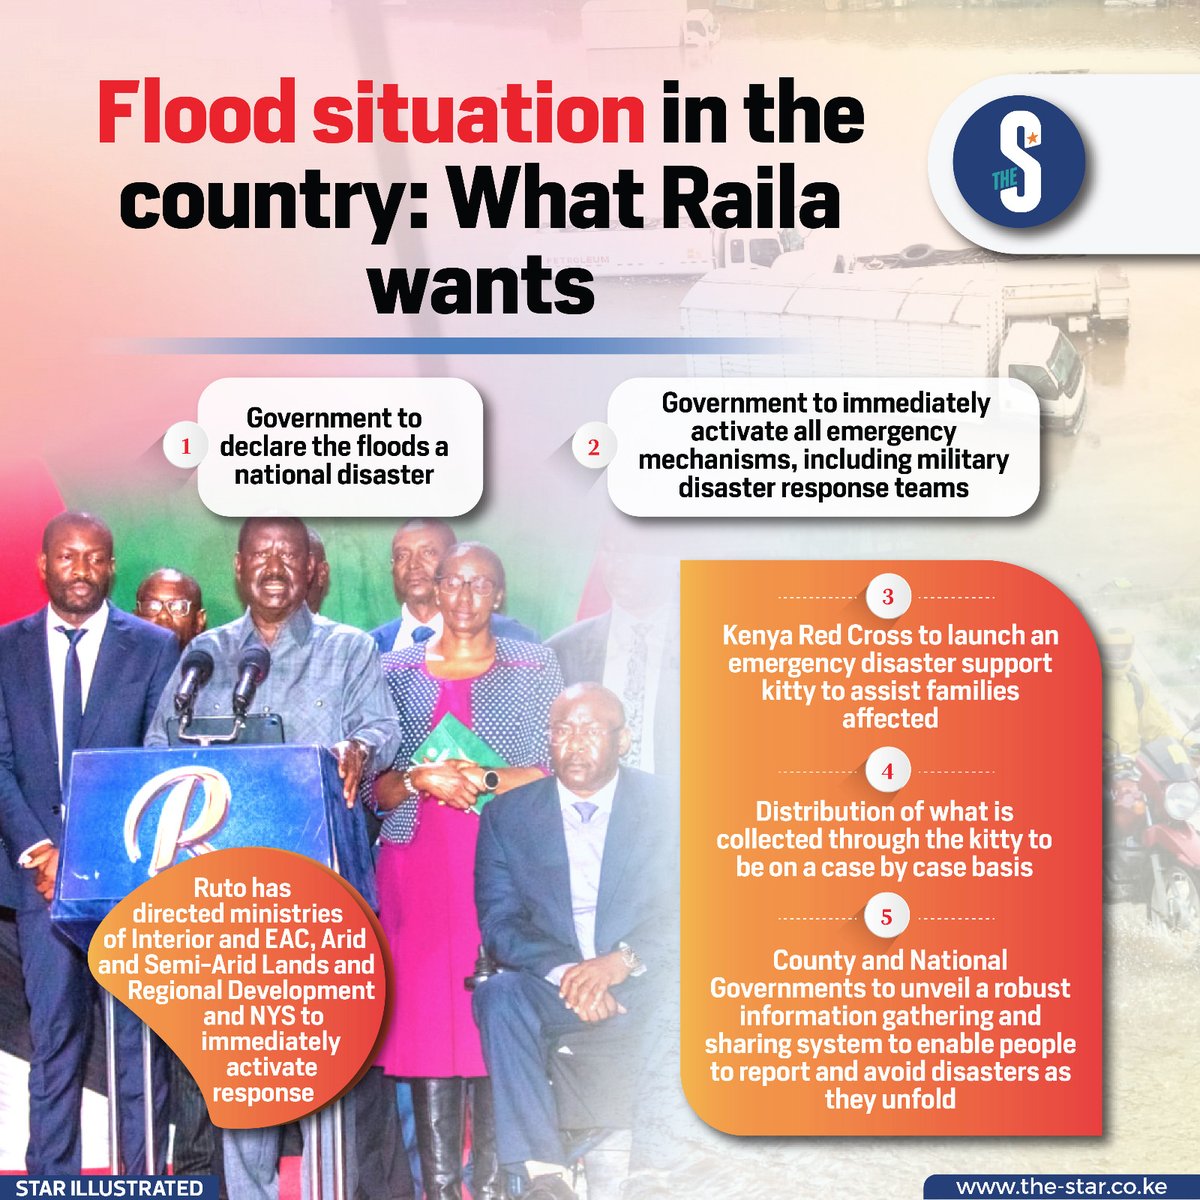 Flood situation in the country: What Raila wants.

#starinfographics